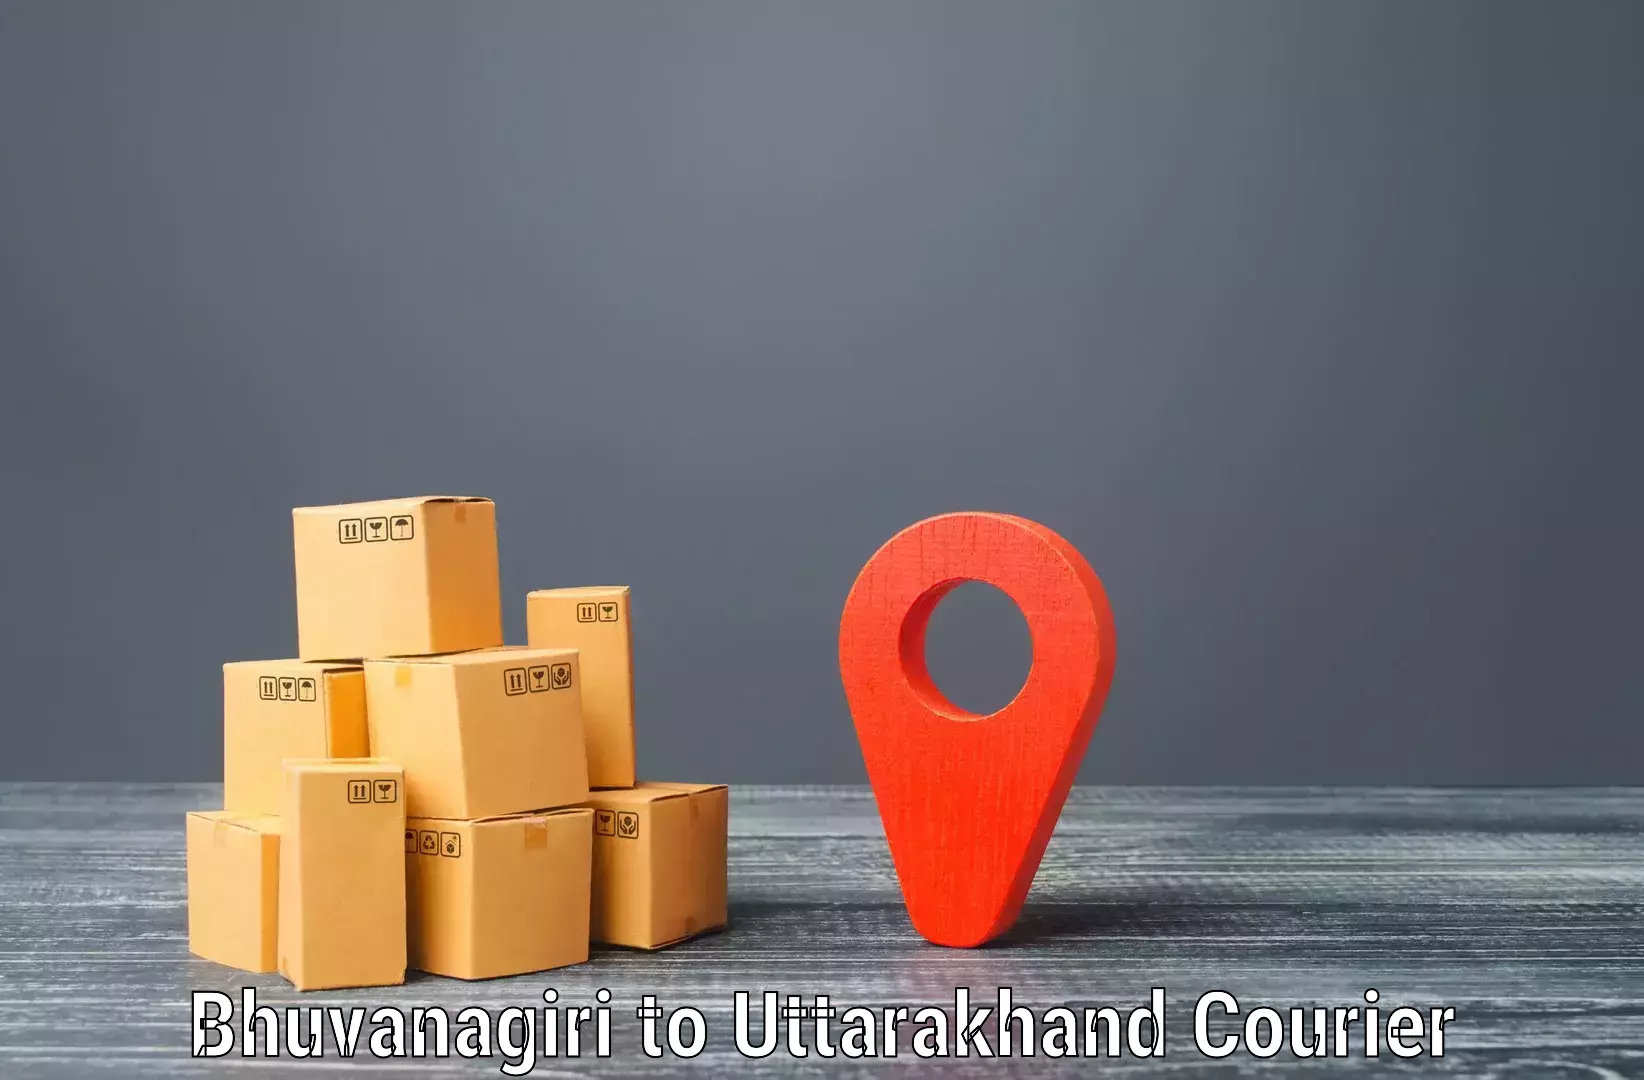 End-to-end delivery Bhuvanagiri to Nainital